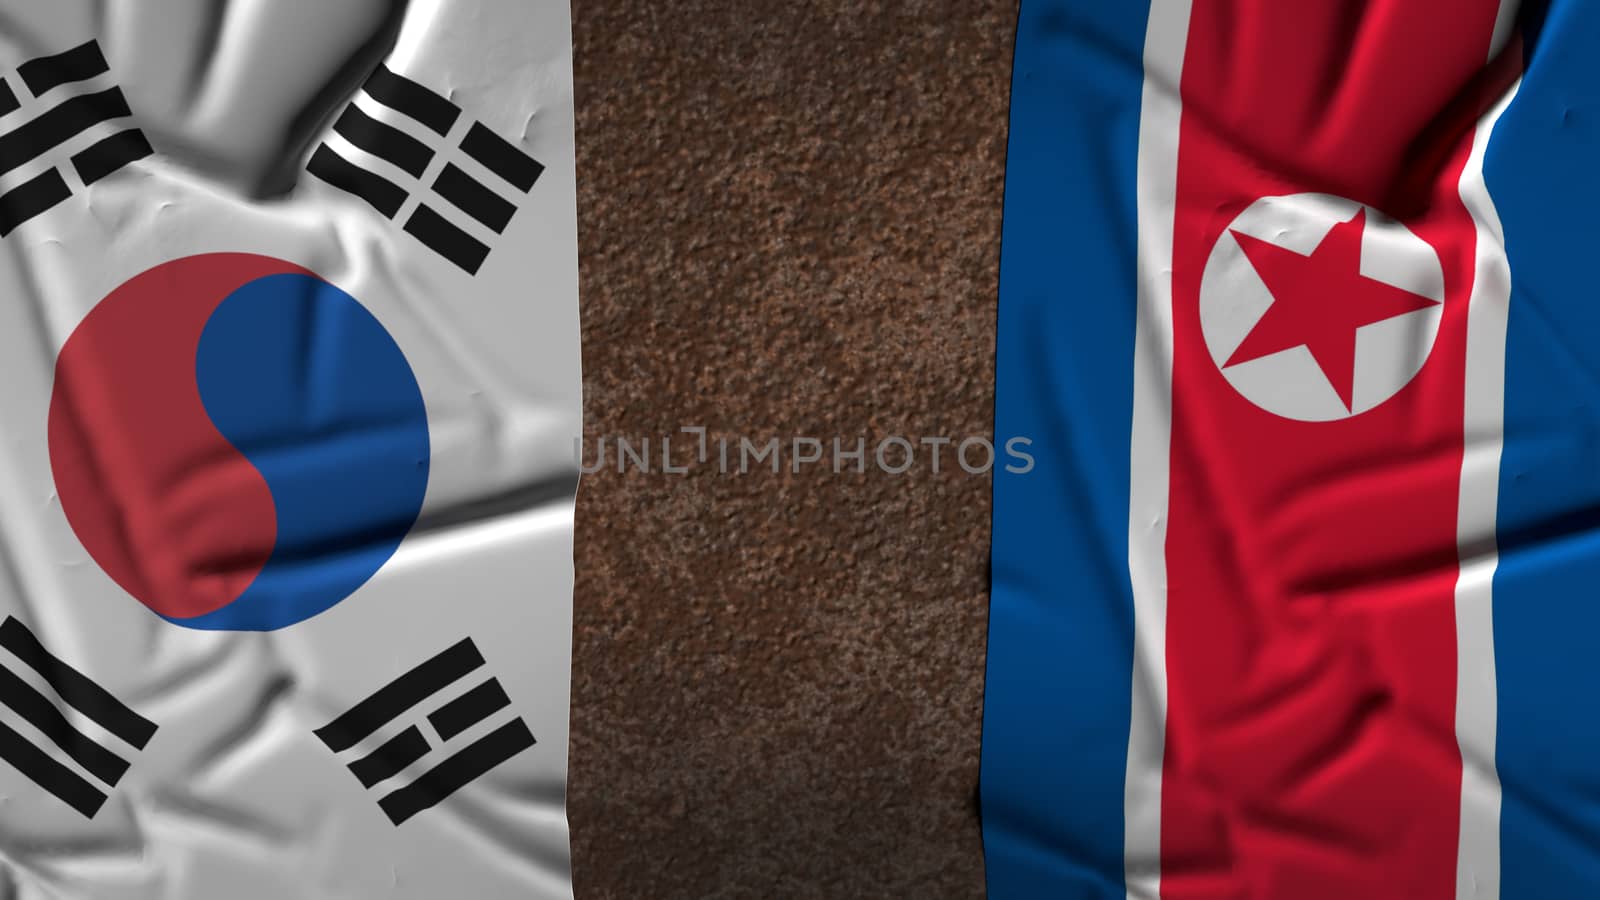 The north Korea and south Korea flags on rusty background 3d rendering for  border content.
